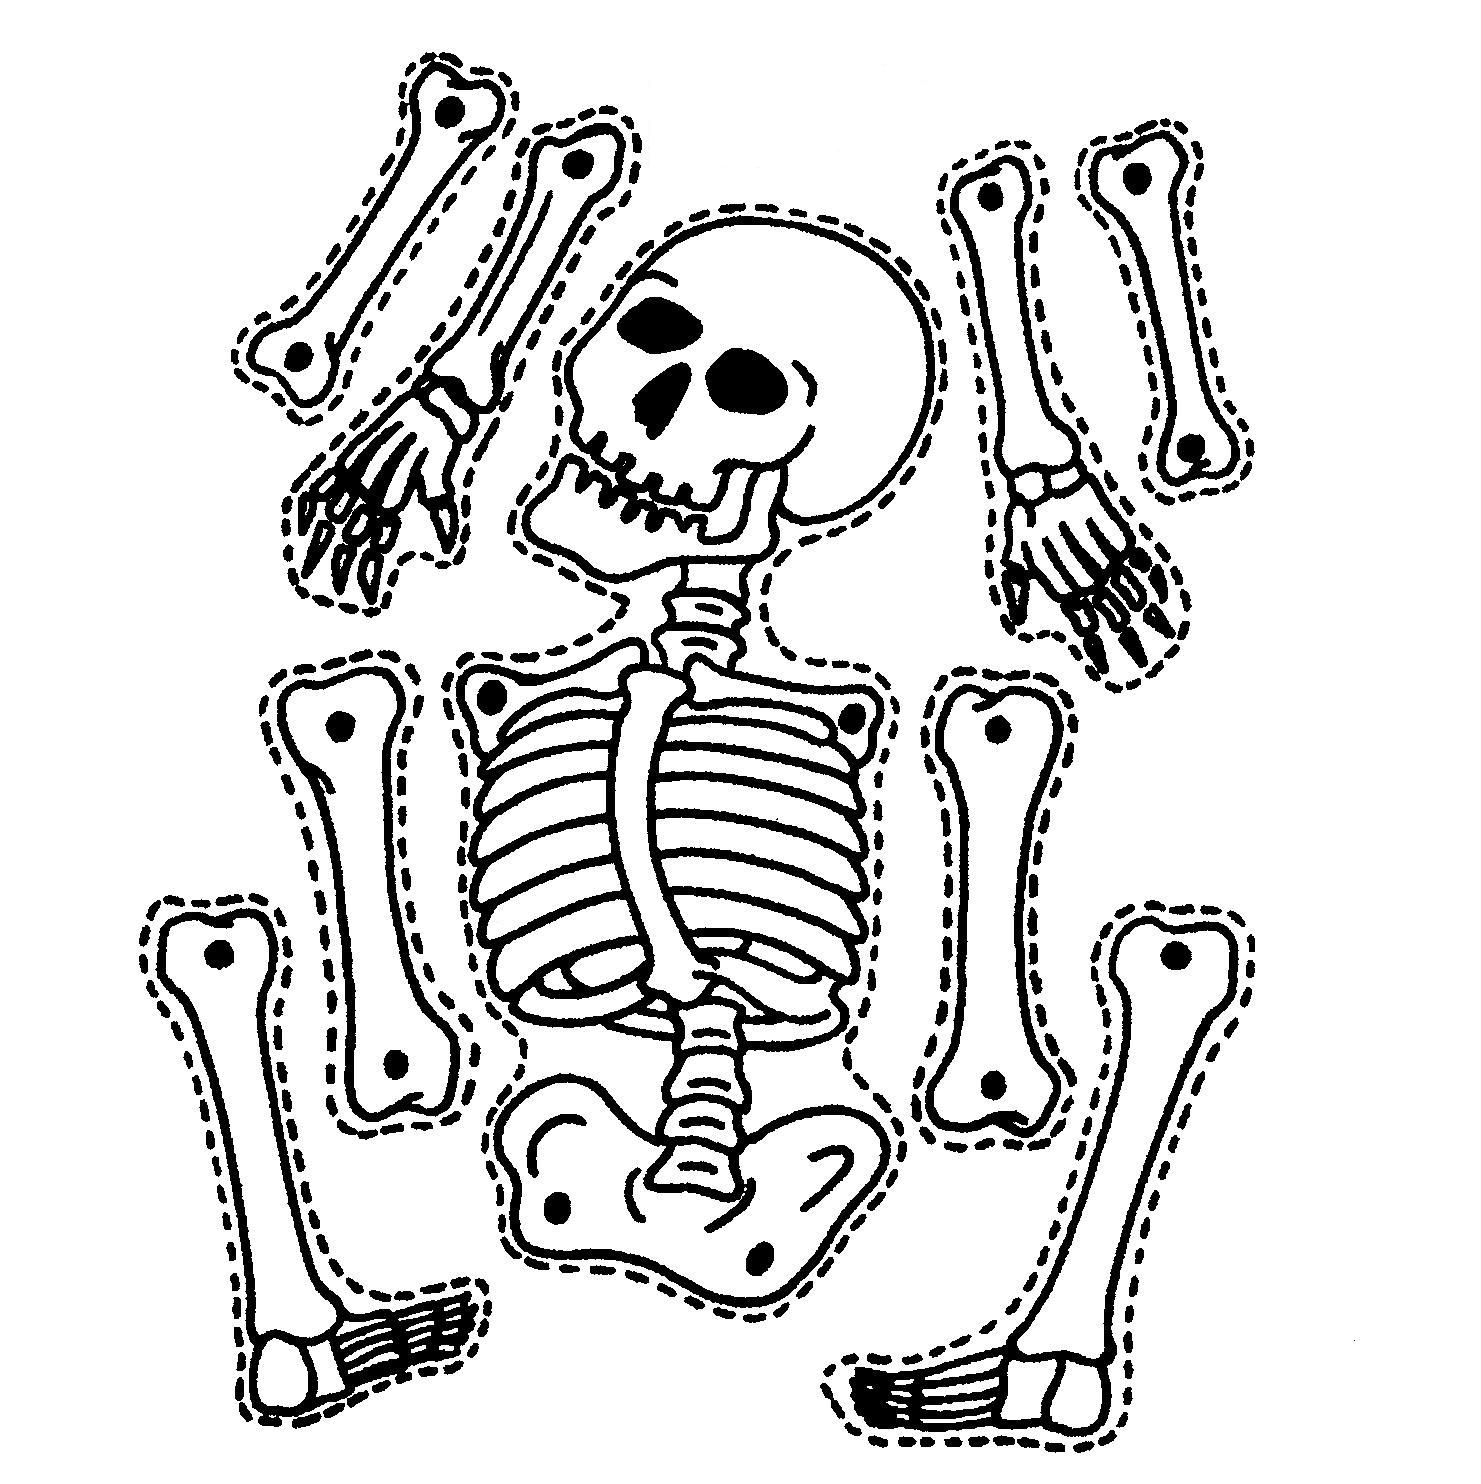 Skeleton 20clipart - Free Clipart Images